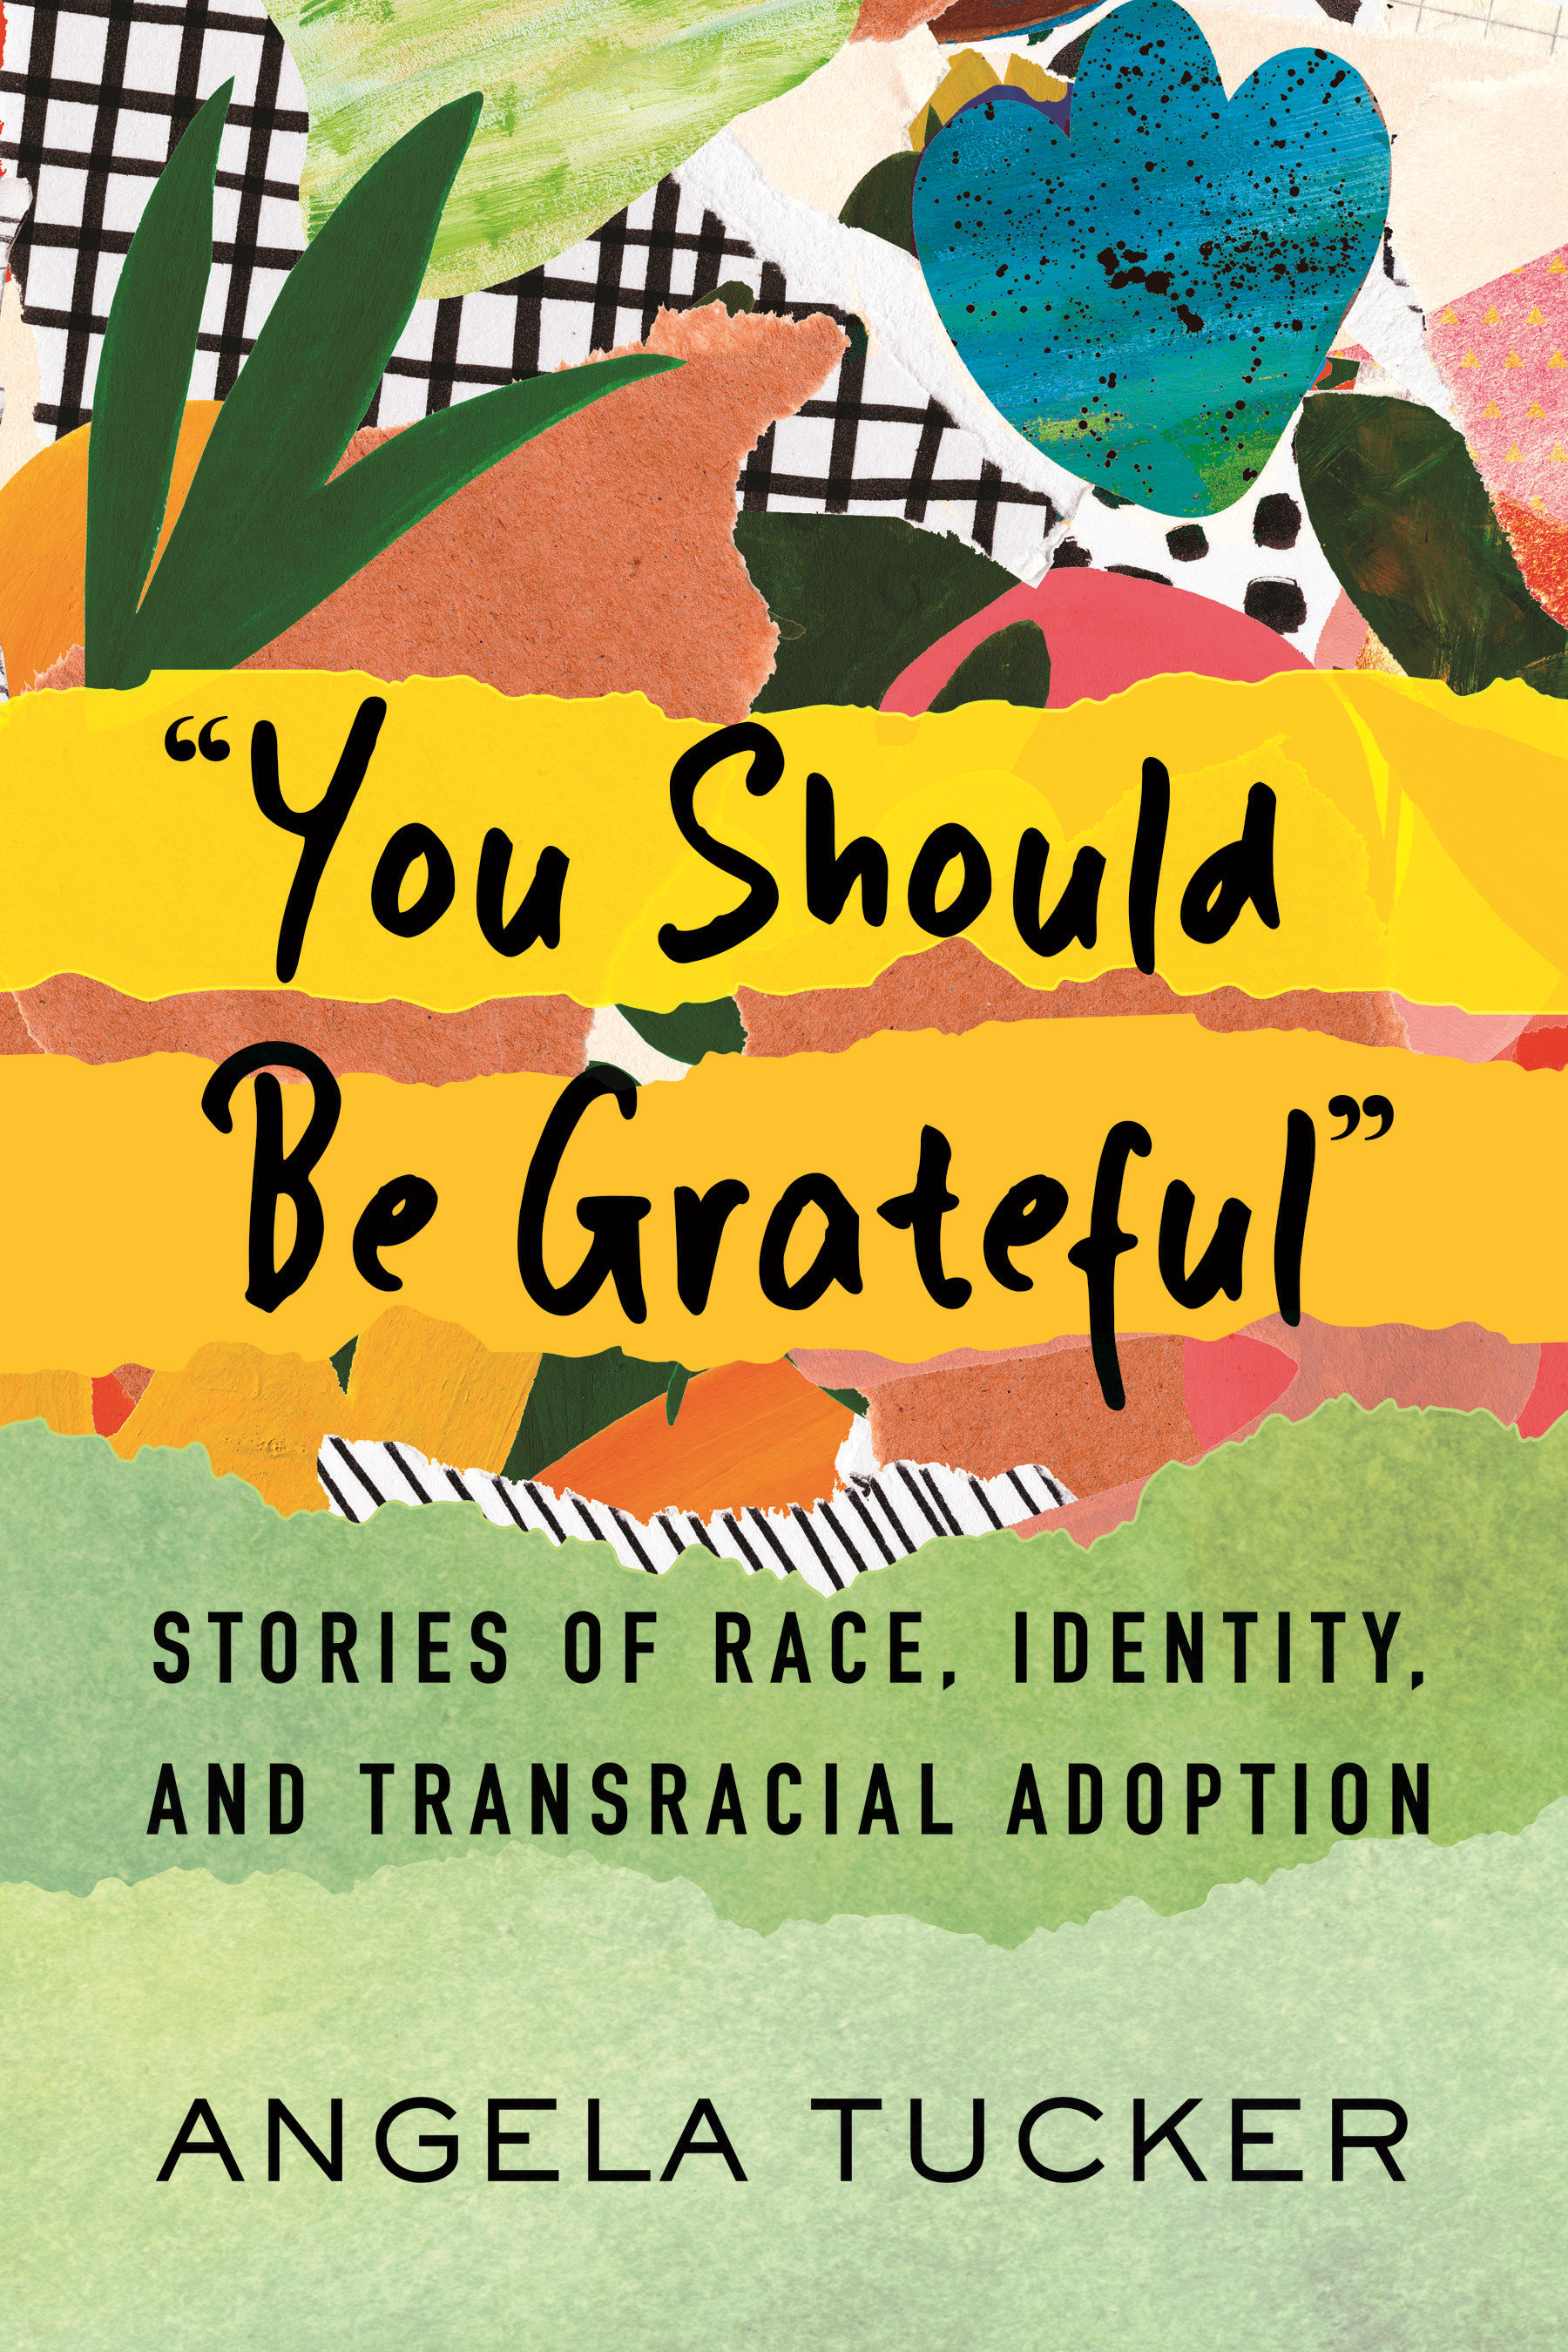 "You Should Be Grateful" (Hardcover Book)